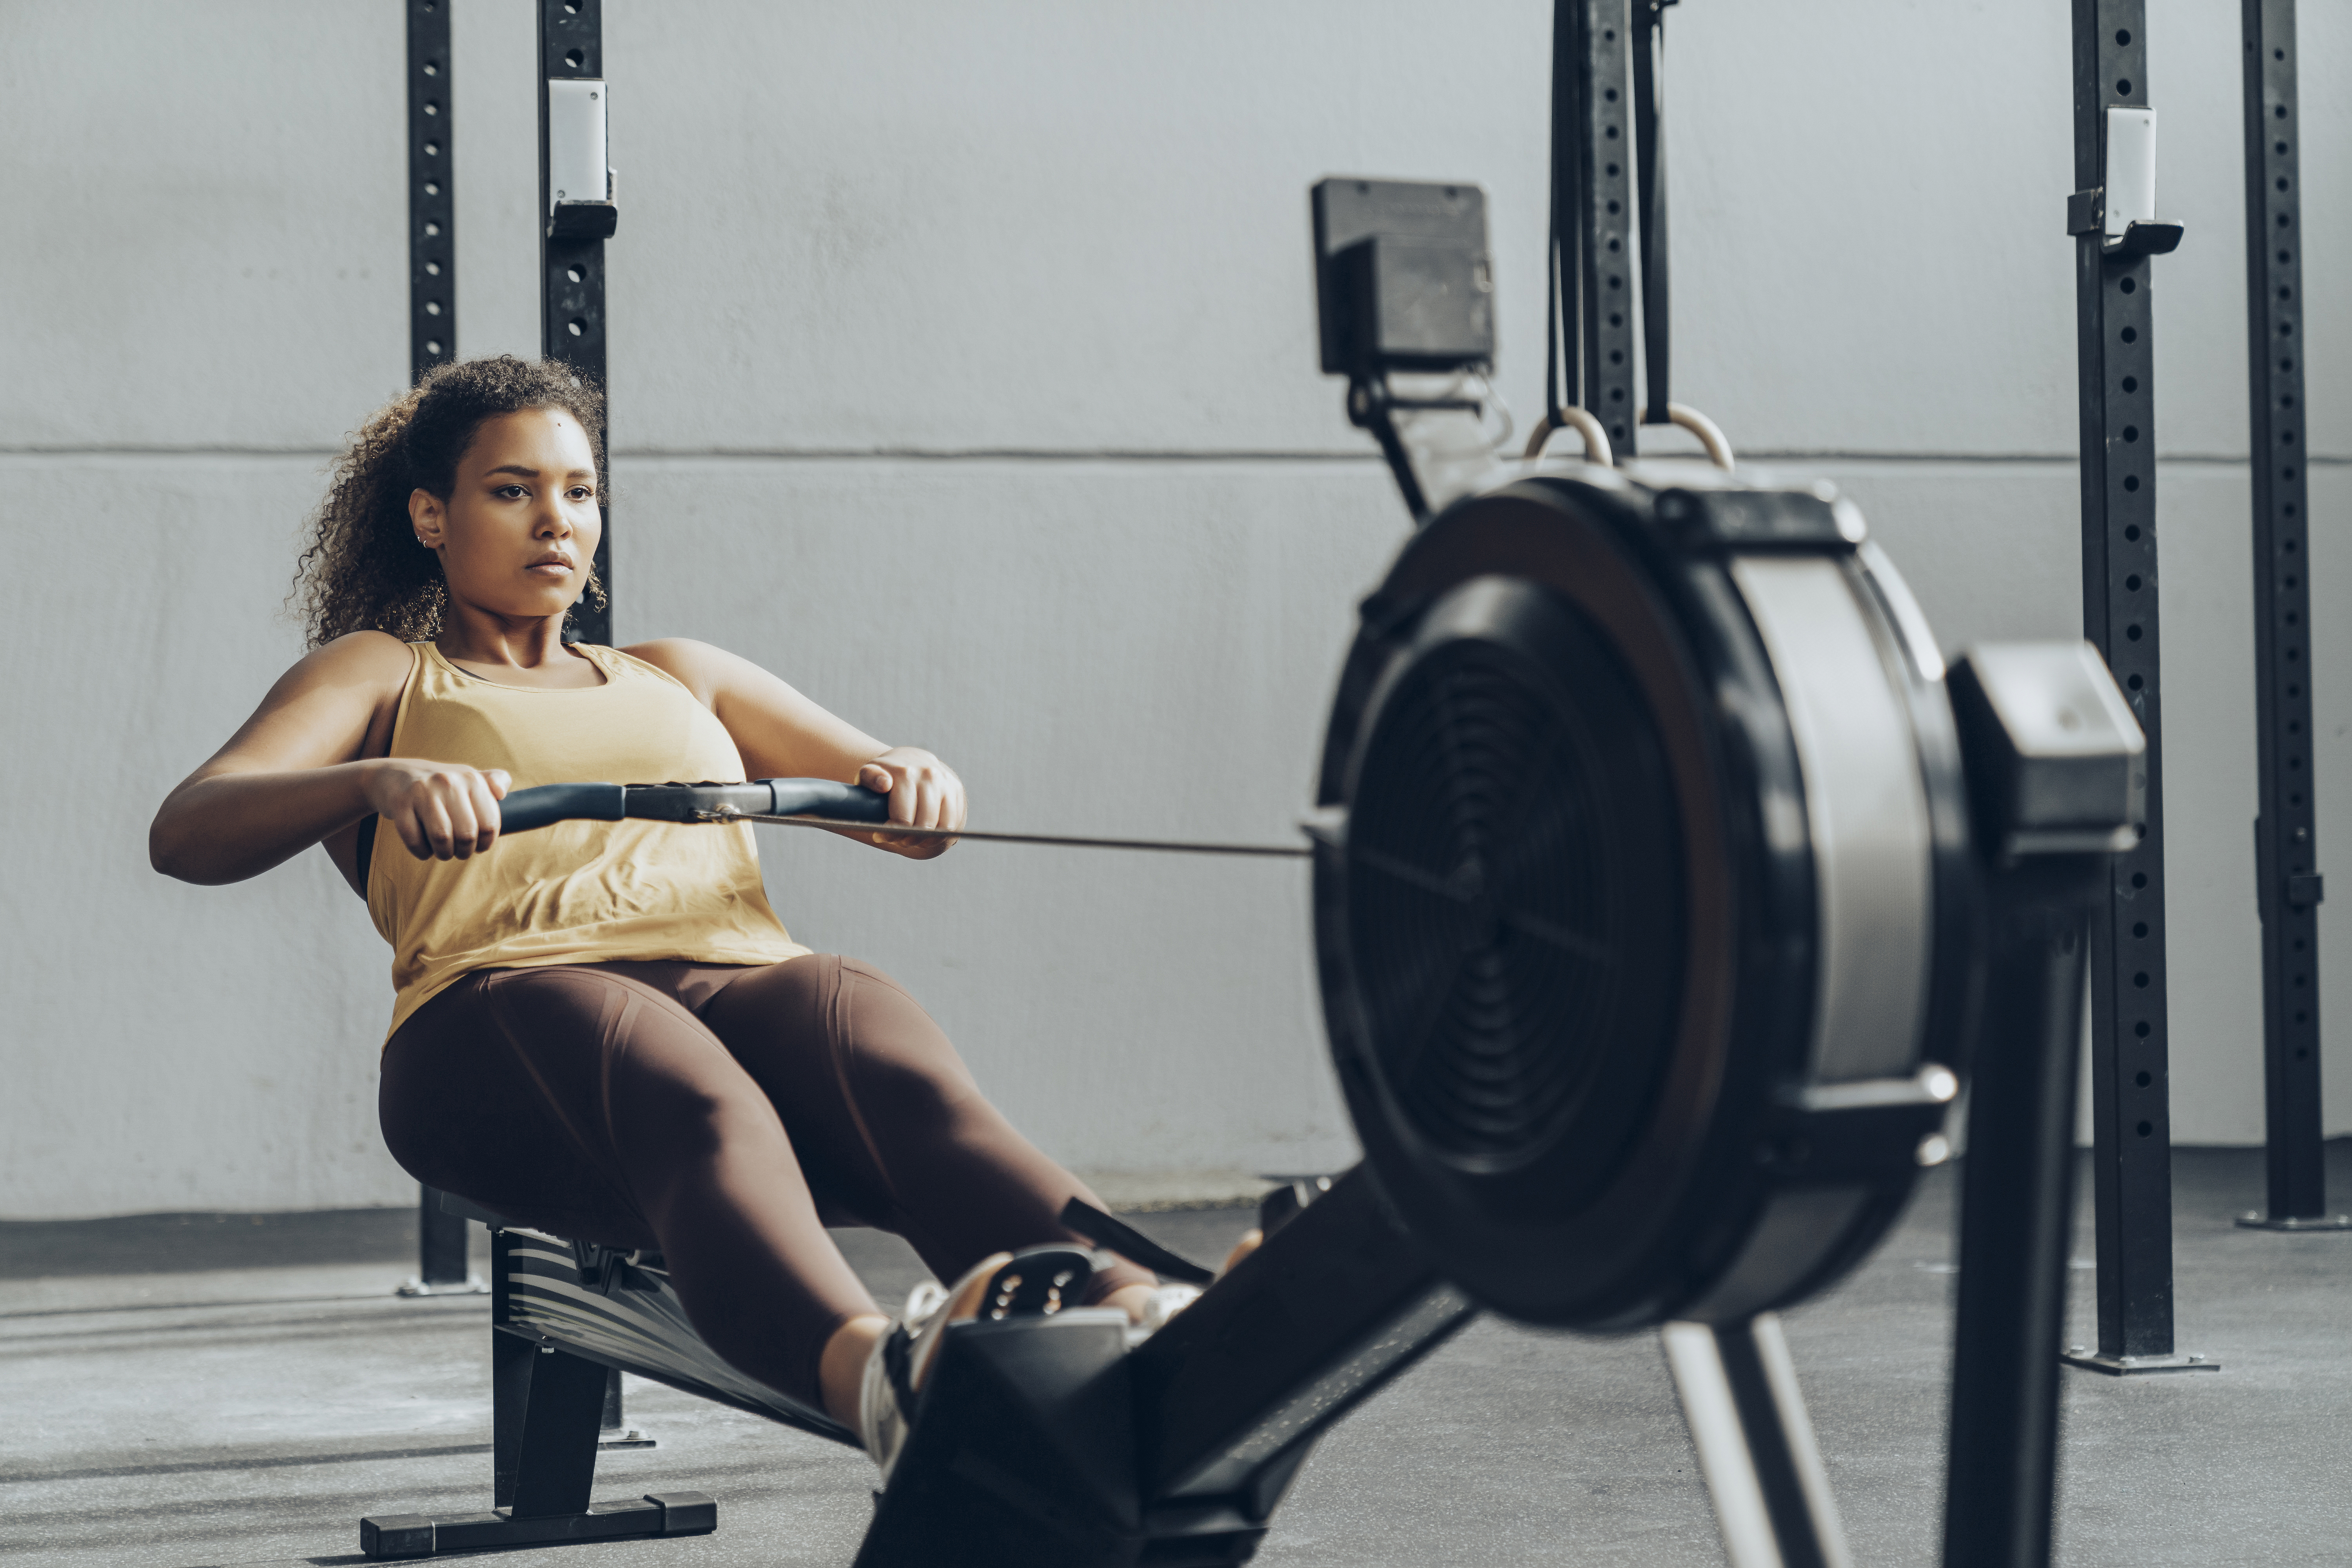 Rowing Machine Muscles: What Muscles Do Rowers Work?